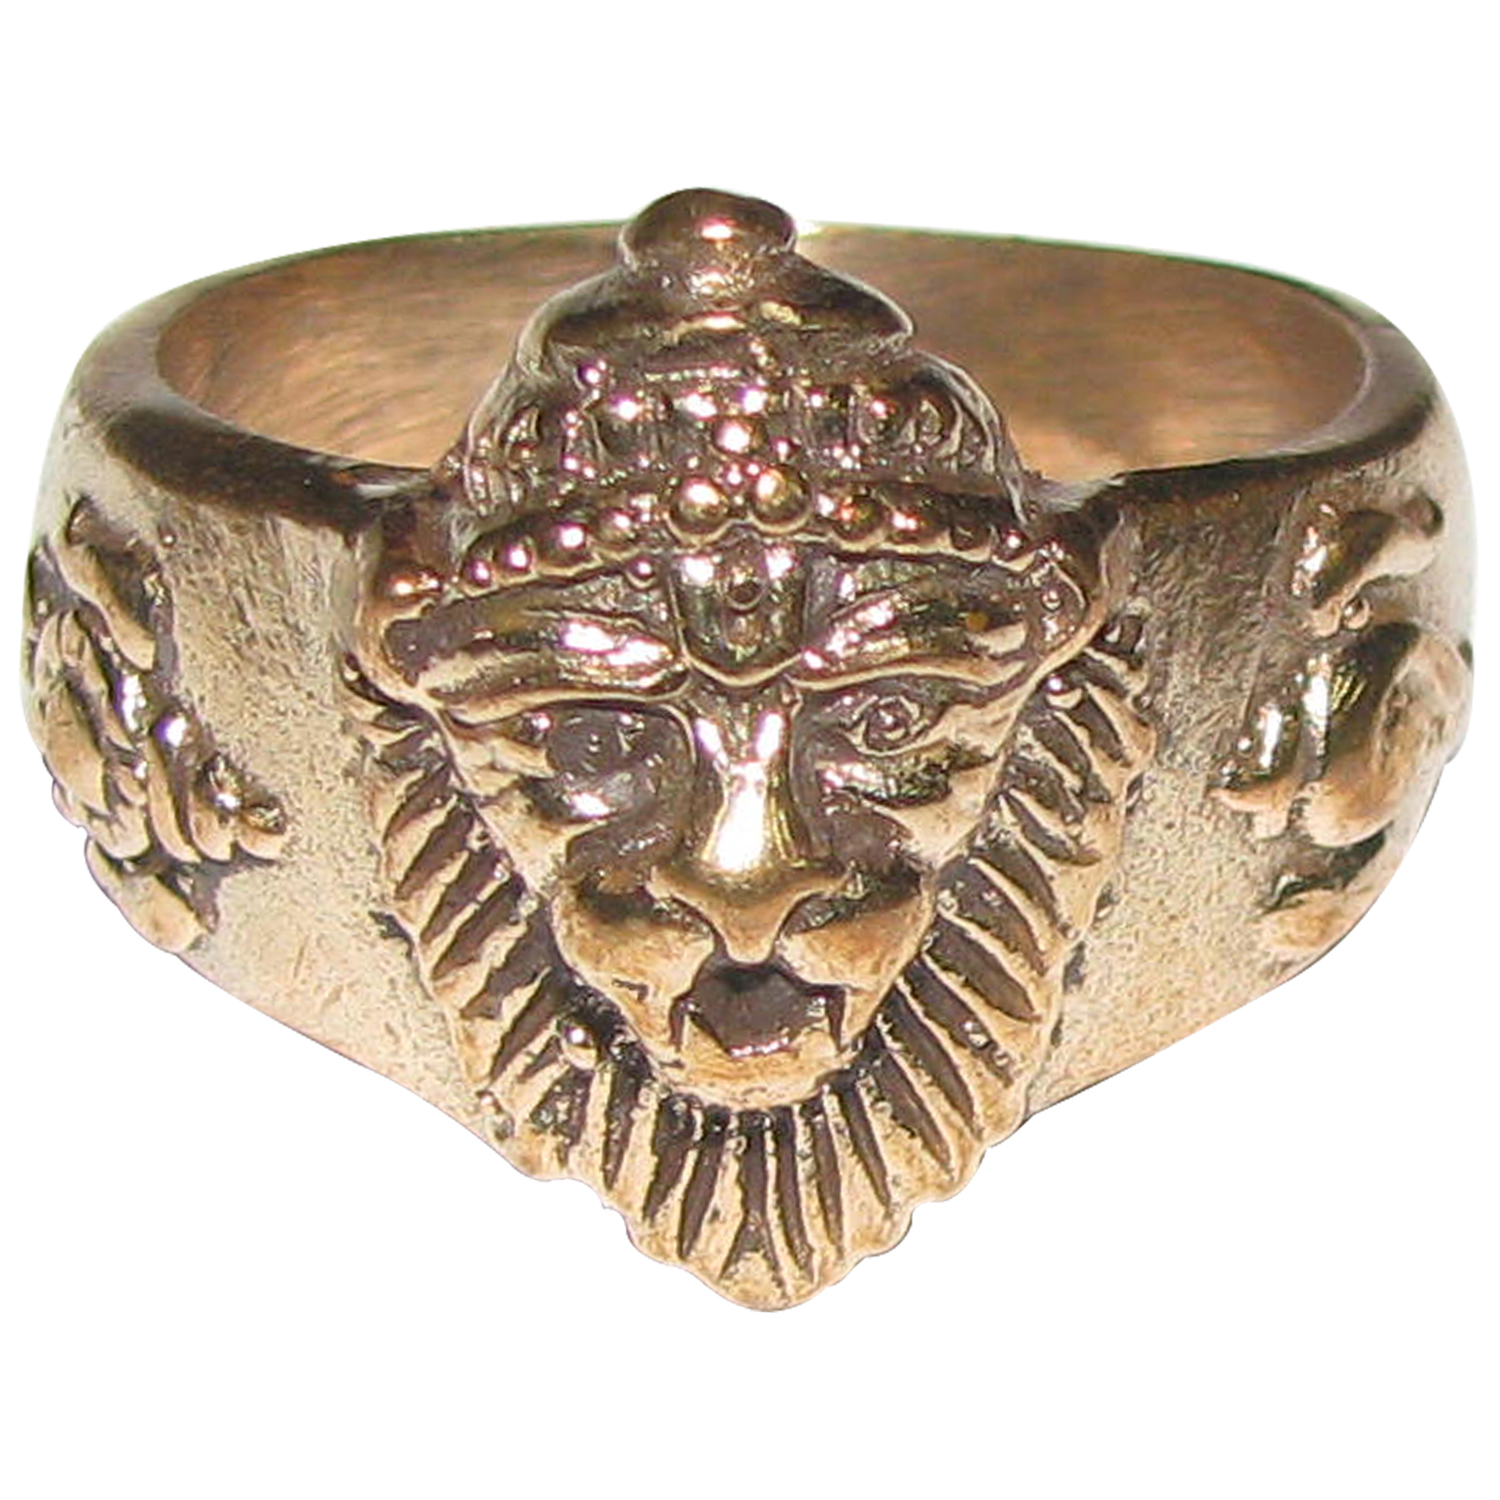 Buy 22K Gold Casting Lord Ganesha Ring 93VC1443 Online from Vaibhav  Jewellers